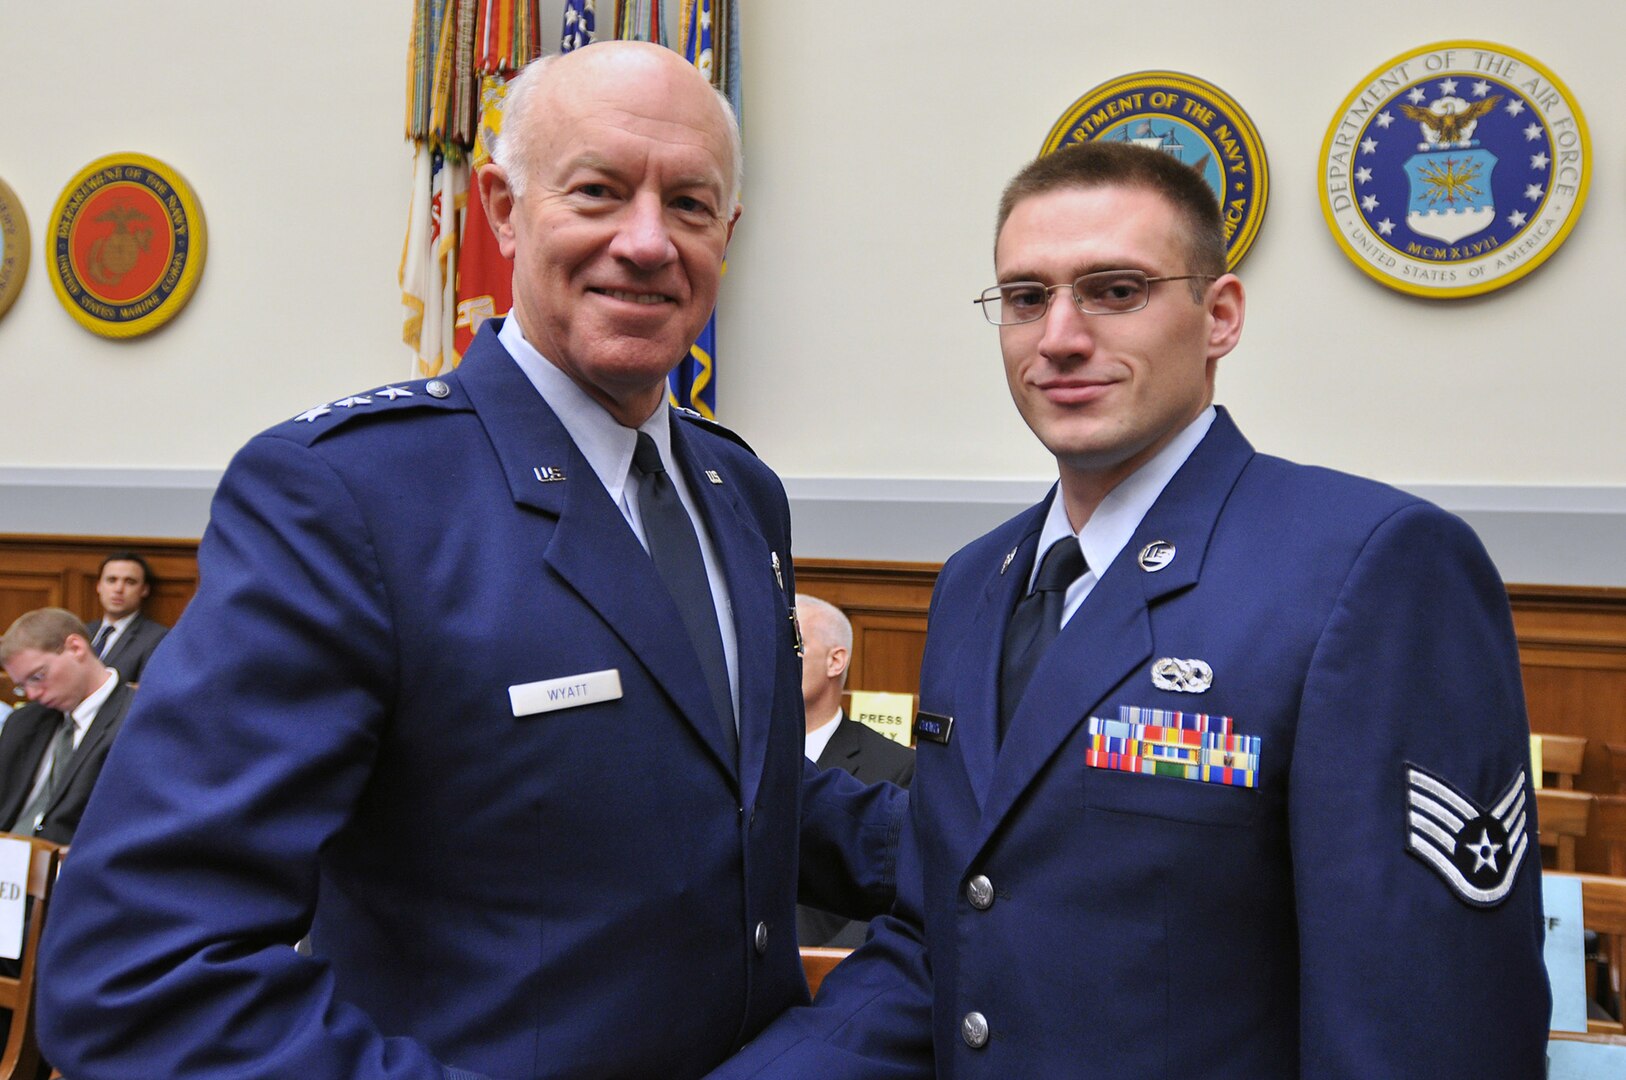 Air Force Lt. Gen. Harry M. Wyatt, director of the Air National Guard, and Air Force Staff Sgt. Wes Chadwick, an avionics technician with the 115th Fighter Wing, Wis., at the Rayburn House Office Building in Washington April 22 in a congressional hearing on the state of the nation's Air Sovereignty Alert (ASA) operations. The Air Guard operates 16 of the 18 ASA sites located across the United States to protect the nation's airspace.